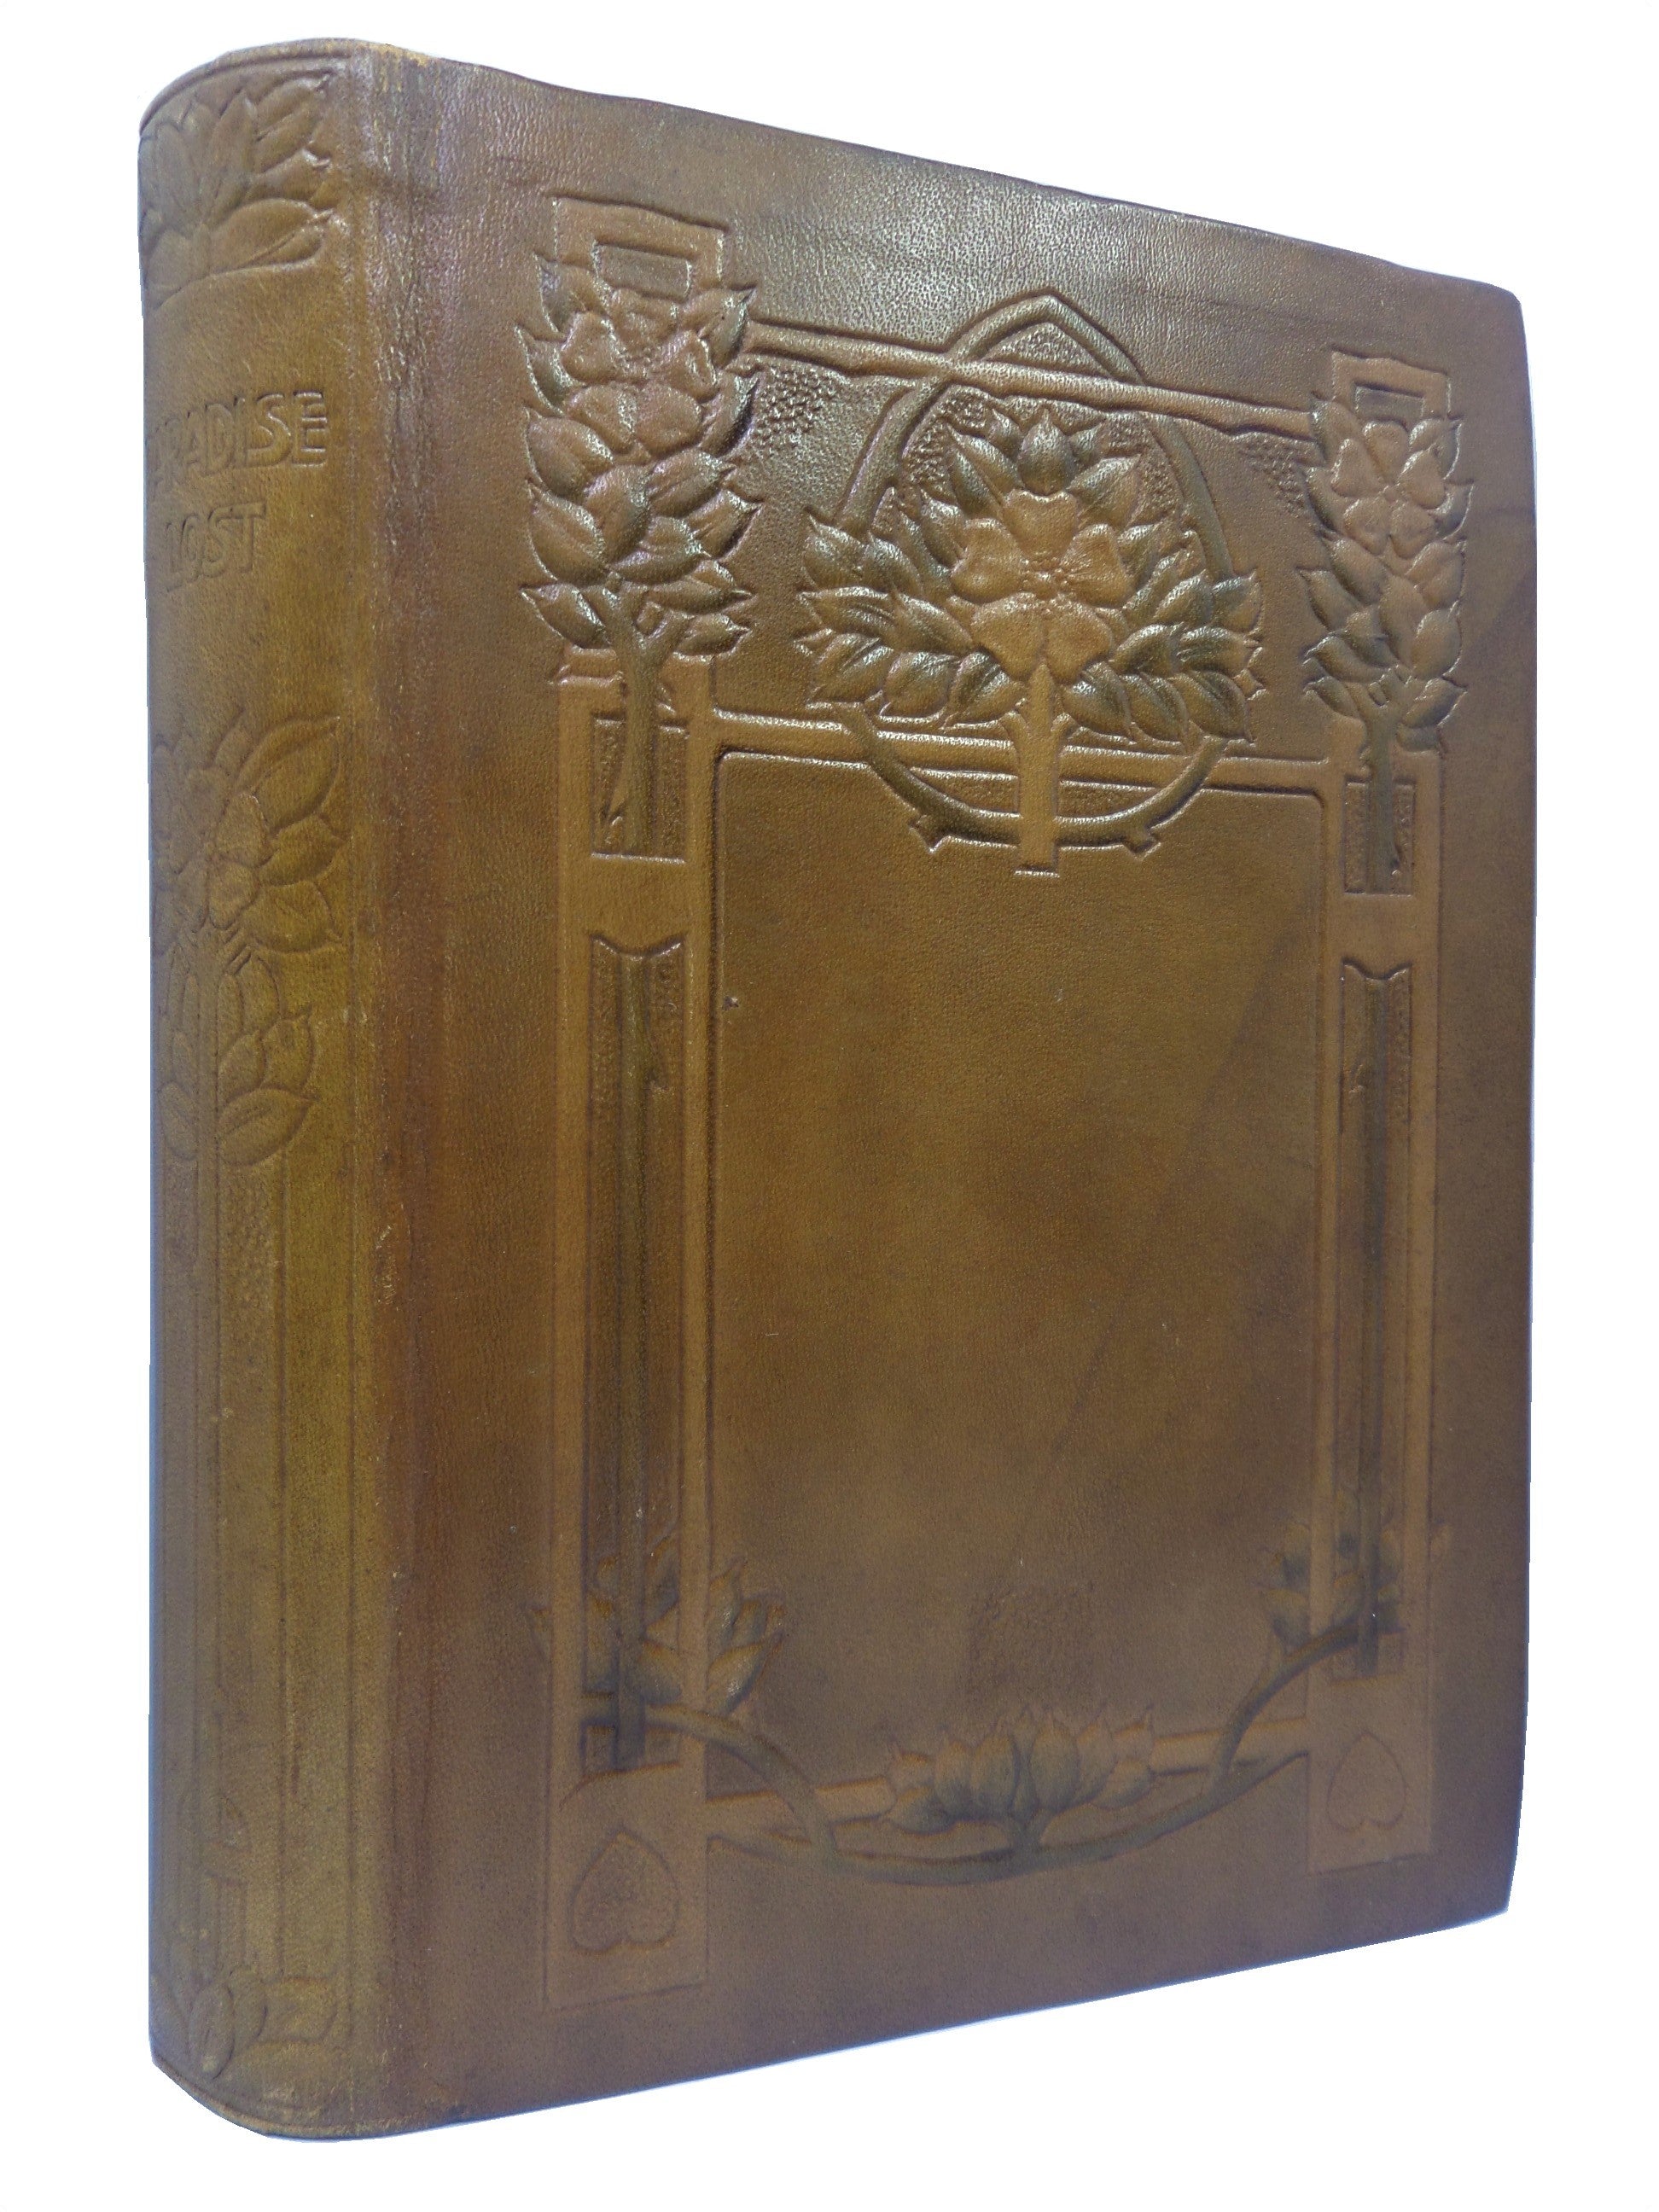 PARADISE LOST BY JOHN MILTON CA.1920 ARTS & CRAFTS-STYLE LEATHER BINDING